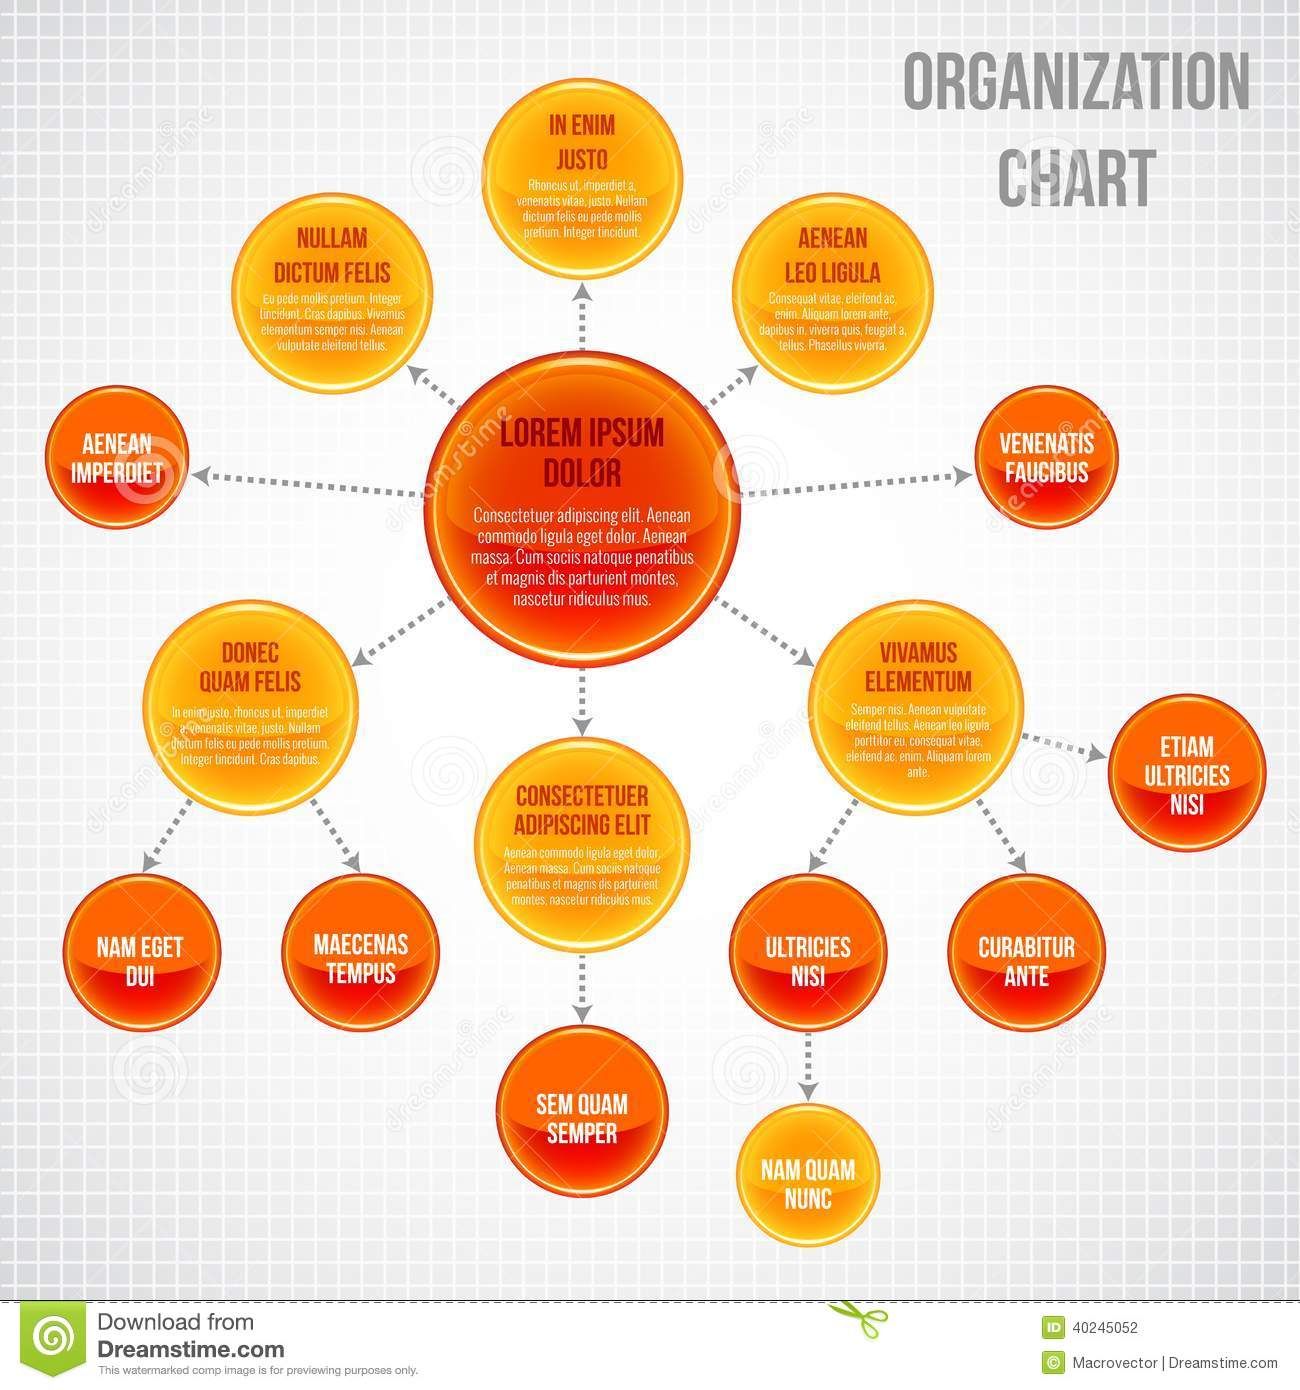 Infographic design organization chart template Vector Image